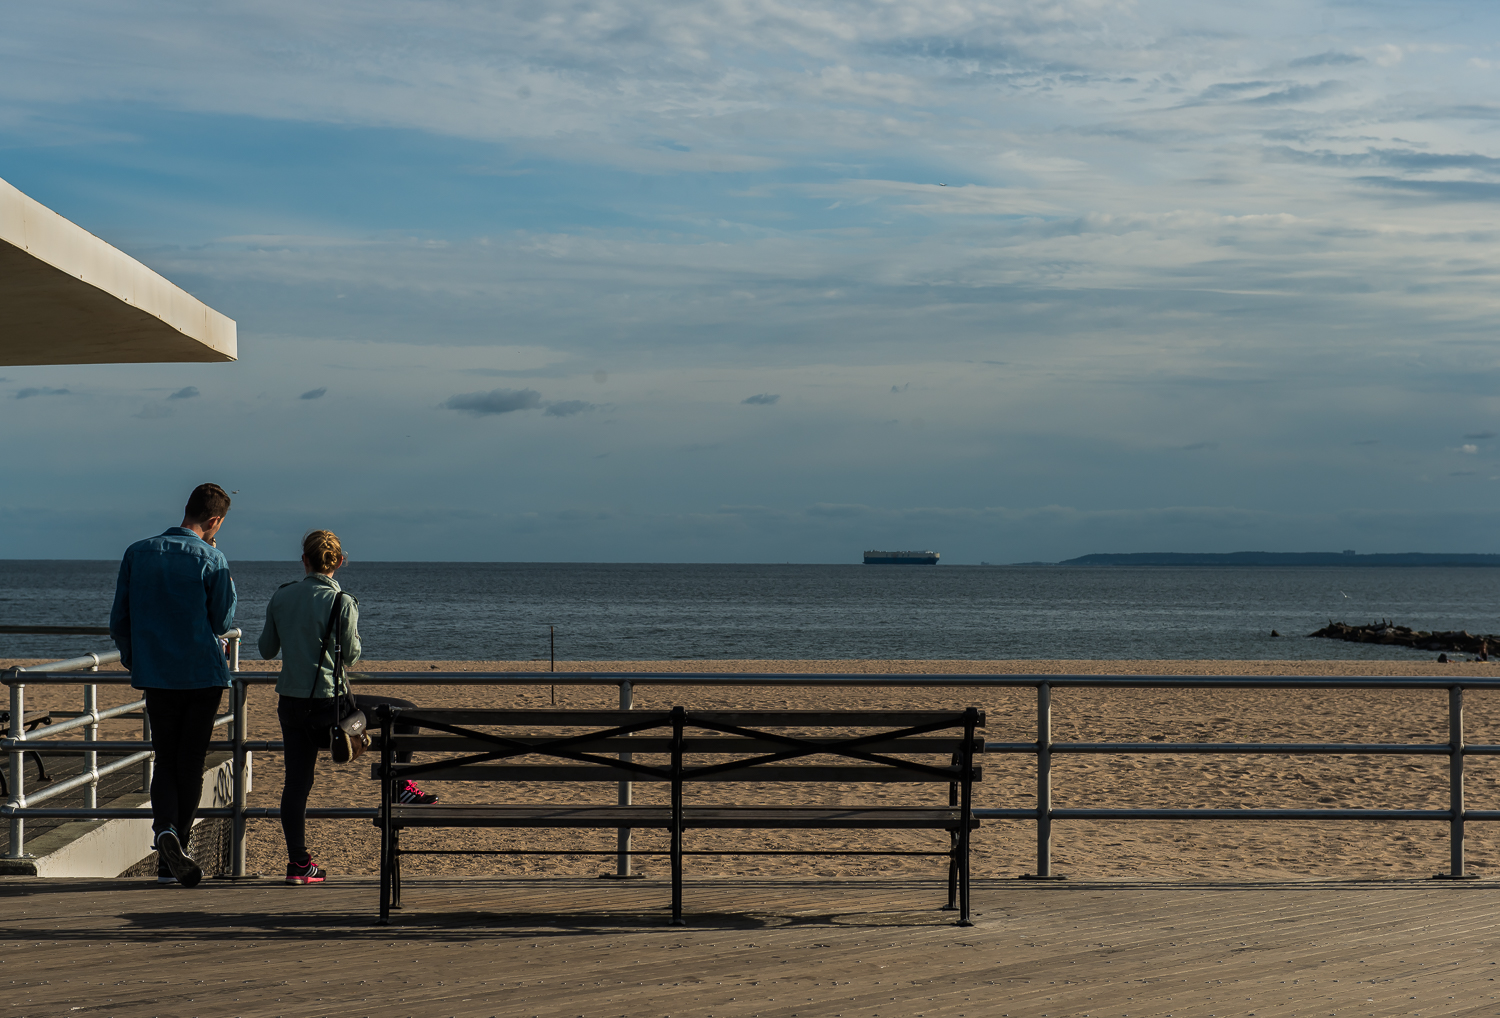 Coney Island - Taking in the view